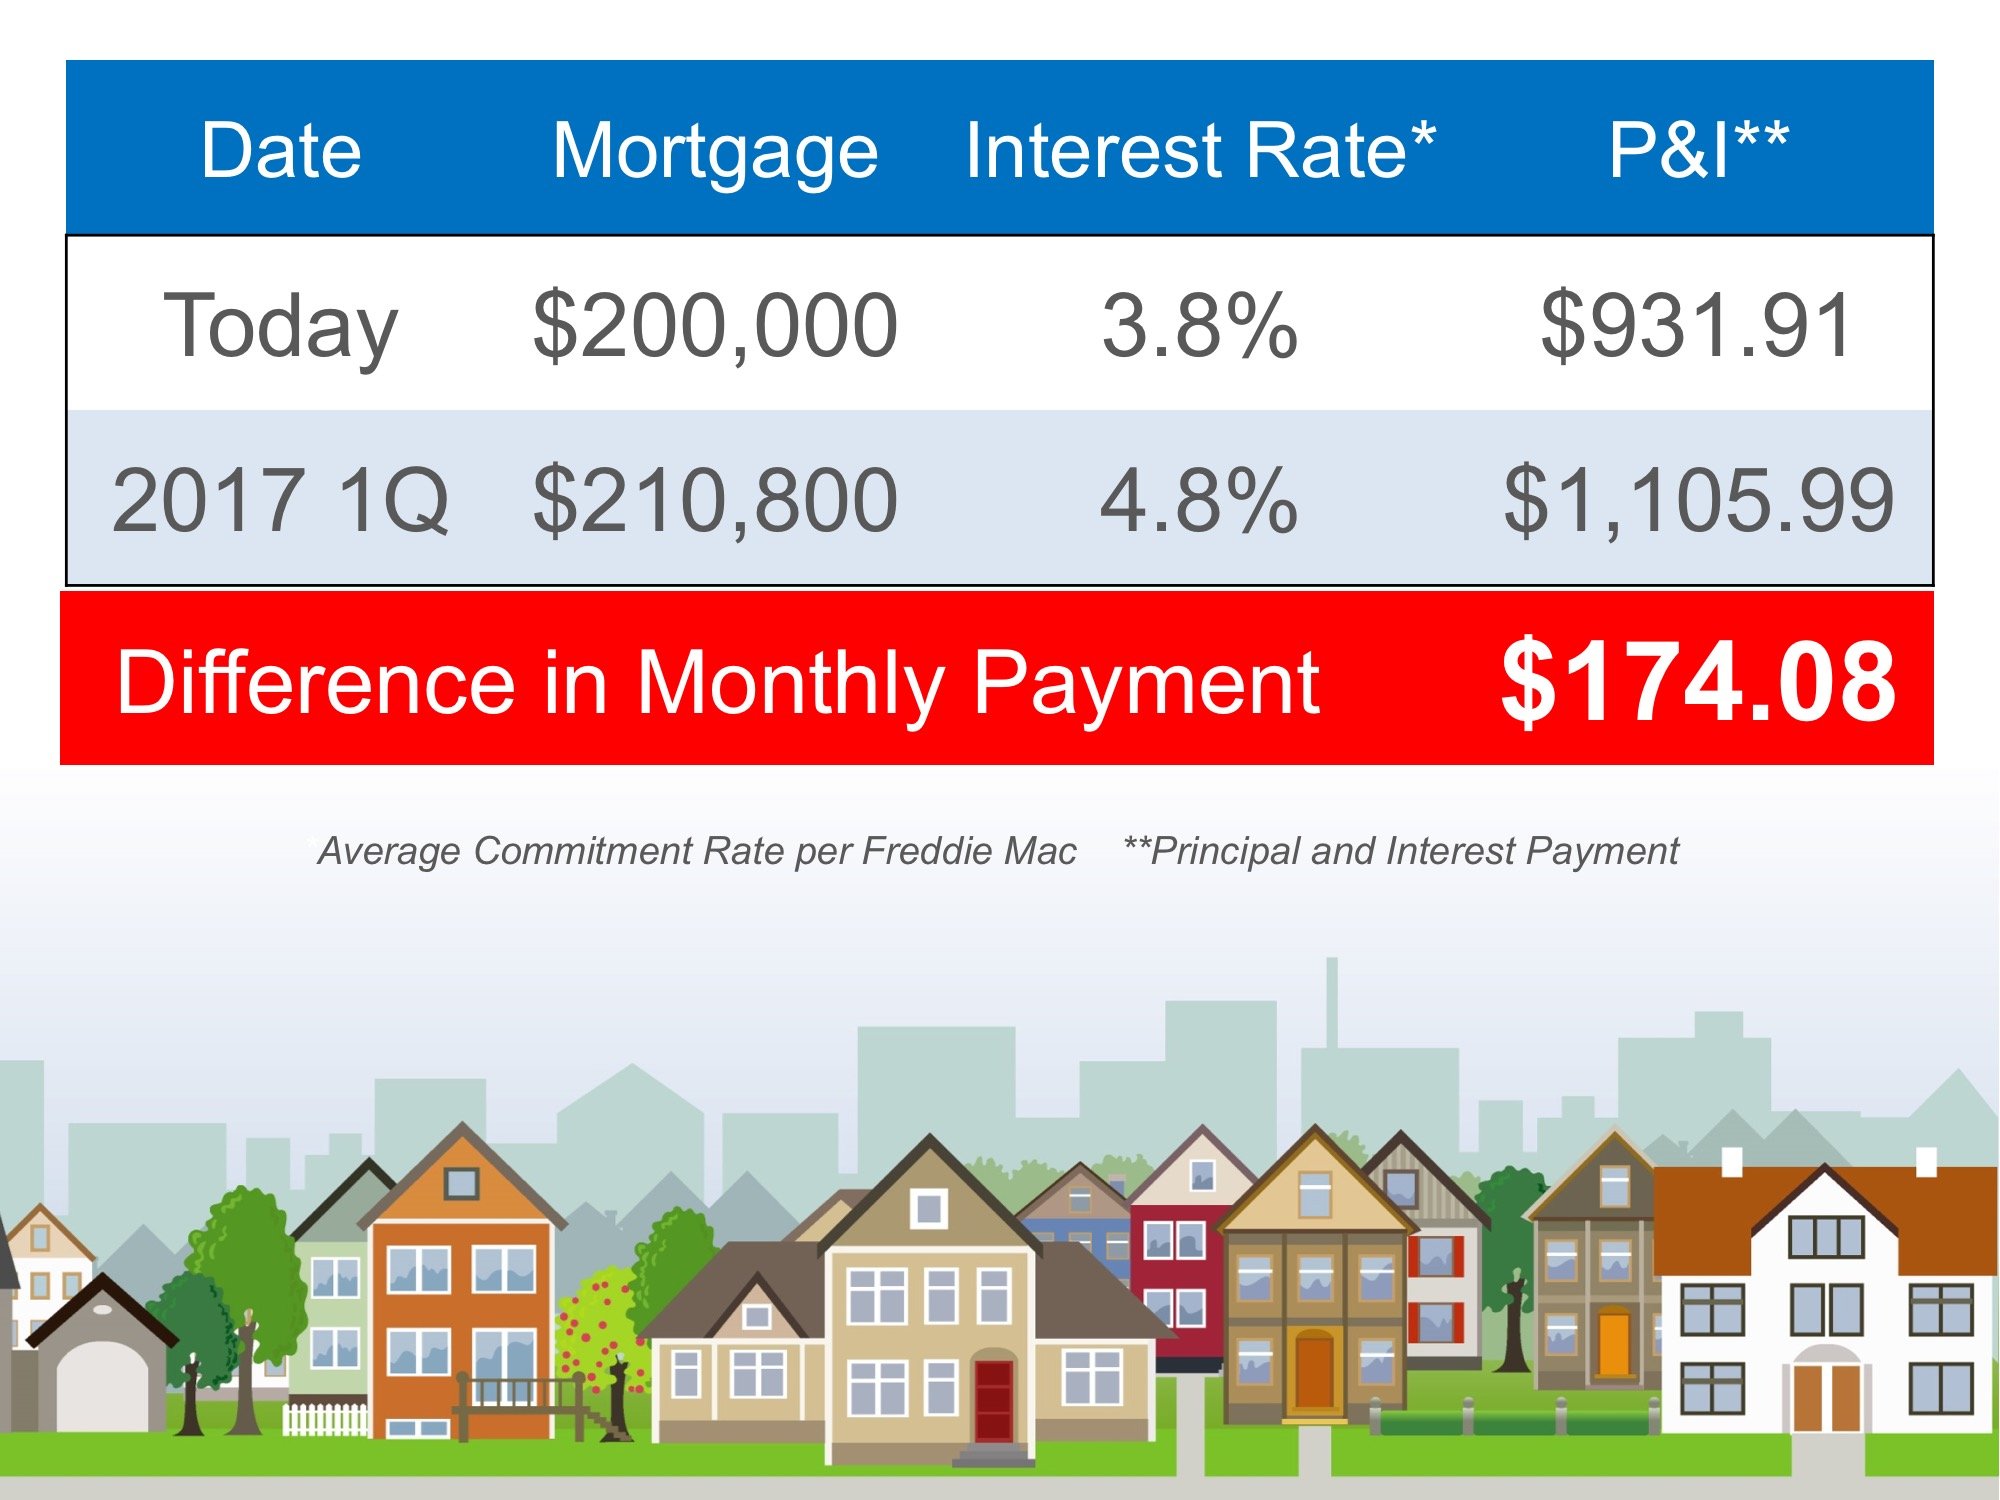 What Price Home Could You Buy for $1000 Monthly Mortgage?